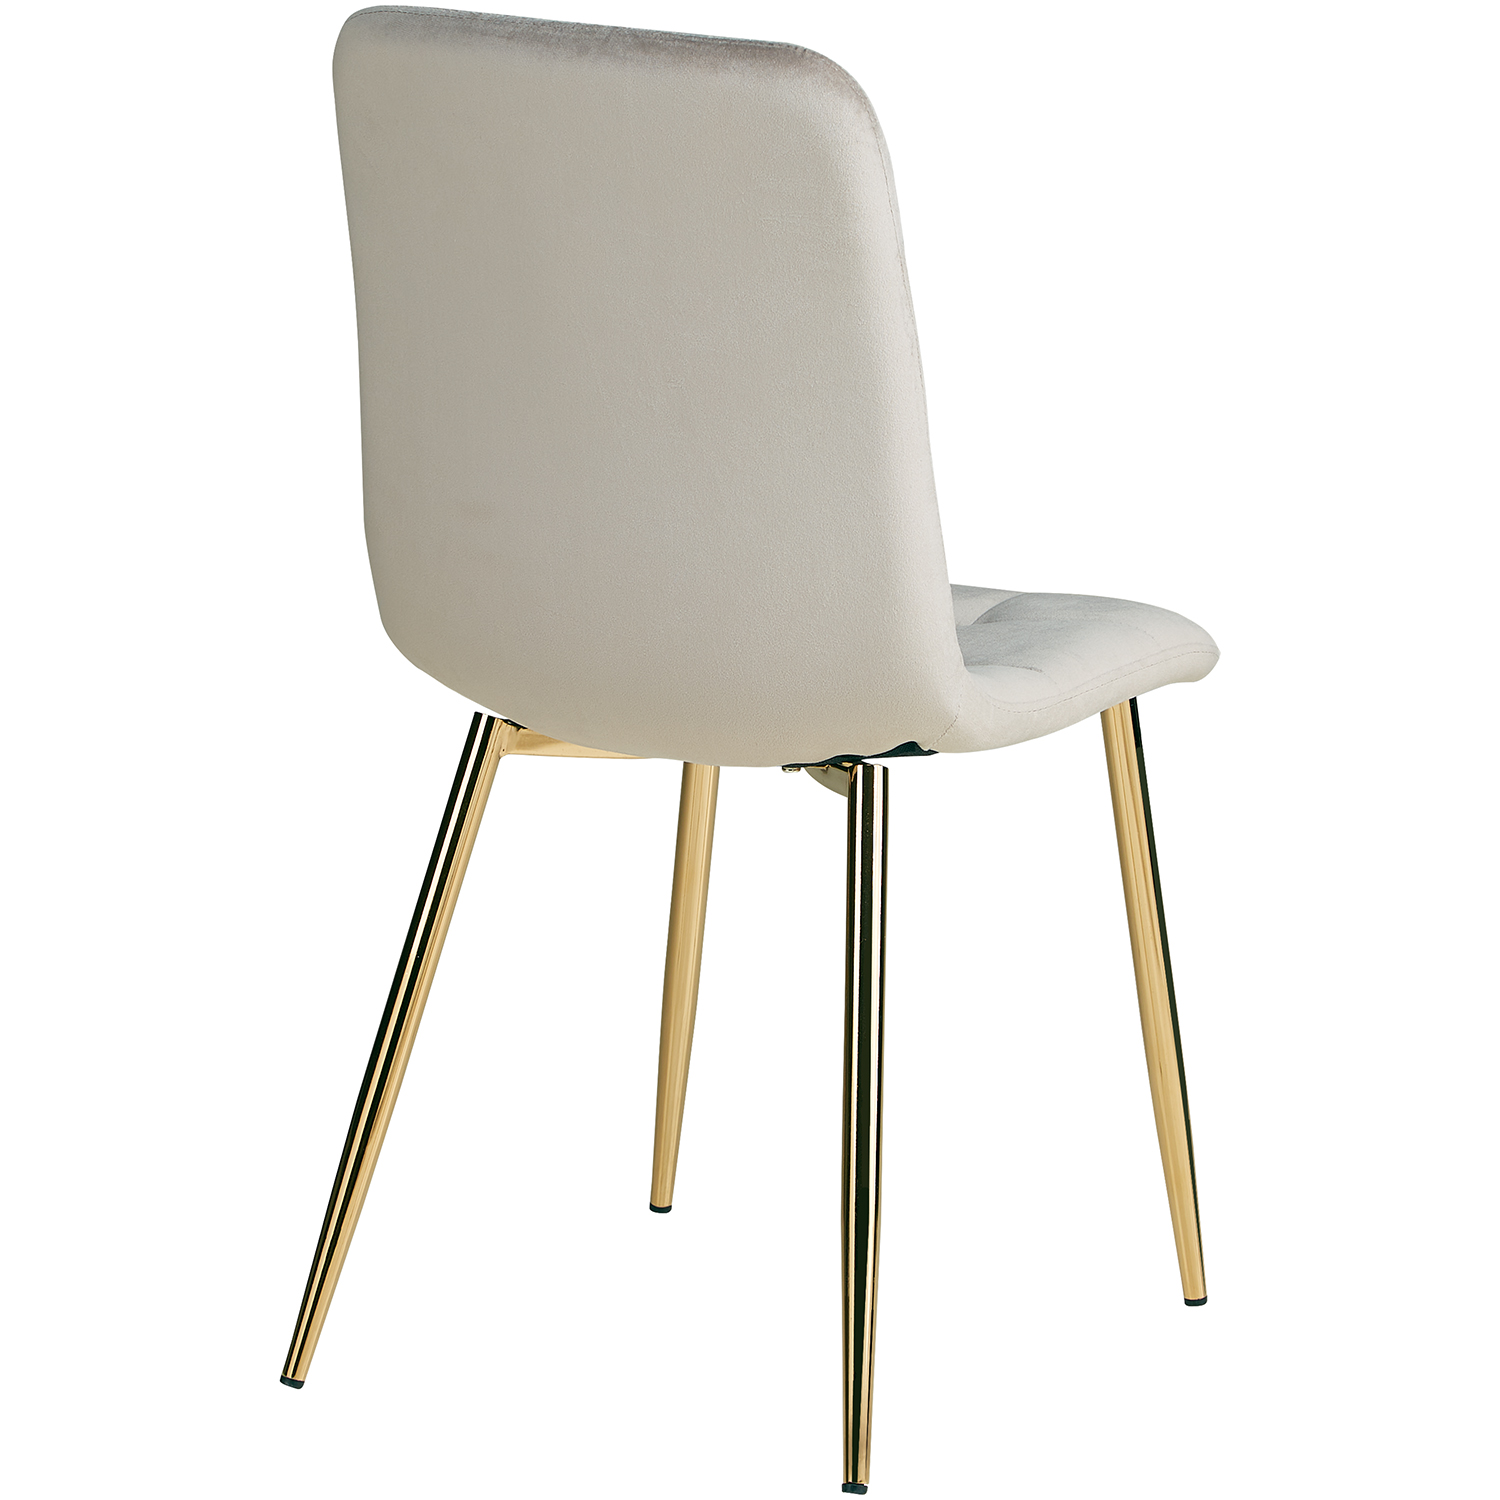 Dining Chair Egg Chair Creme Armchair Dining Room Chair Upholstered Chair Eames Chair Kitchen Chair